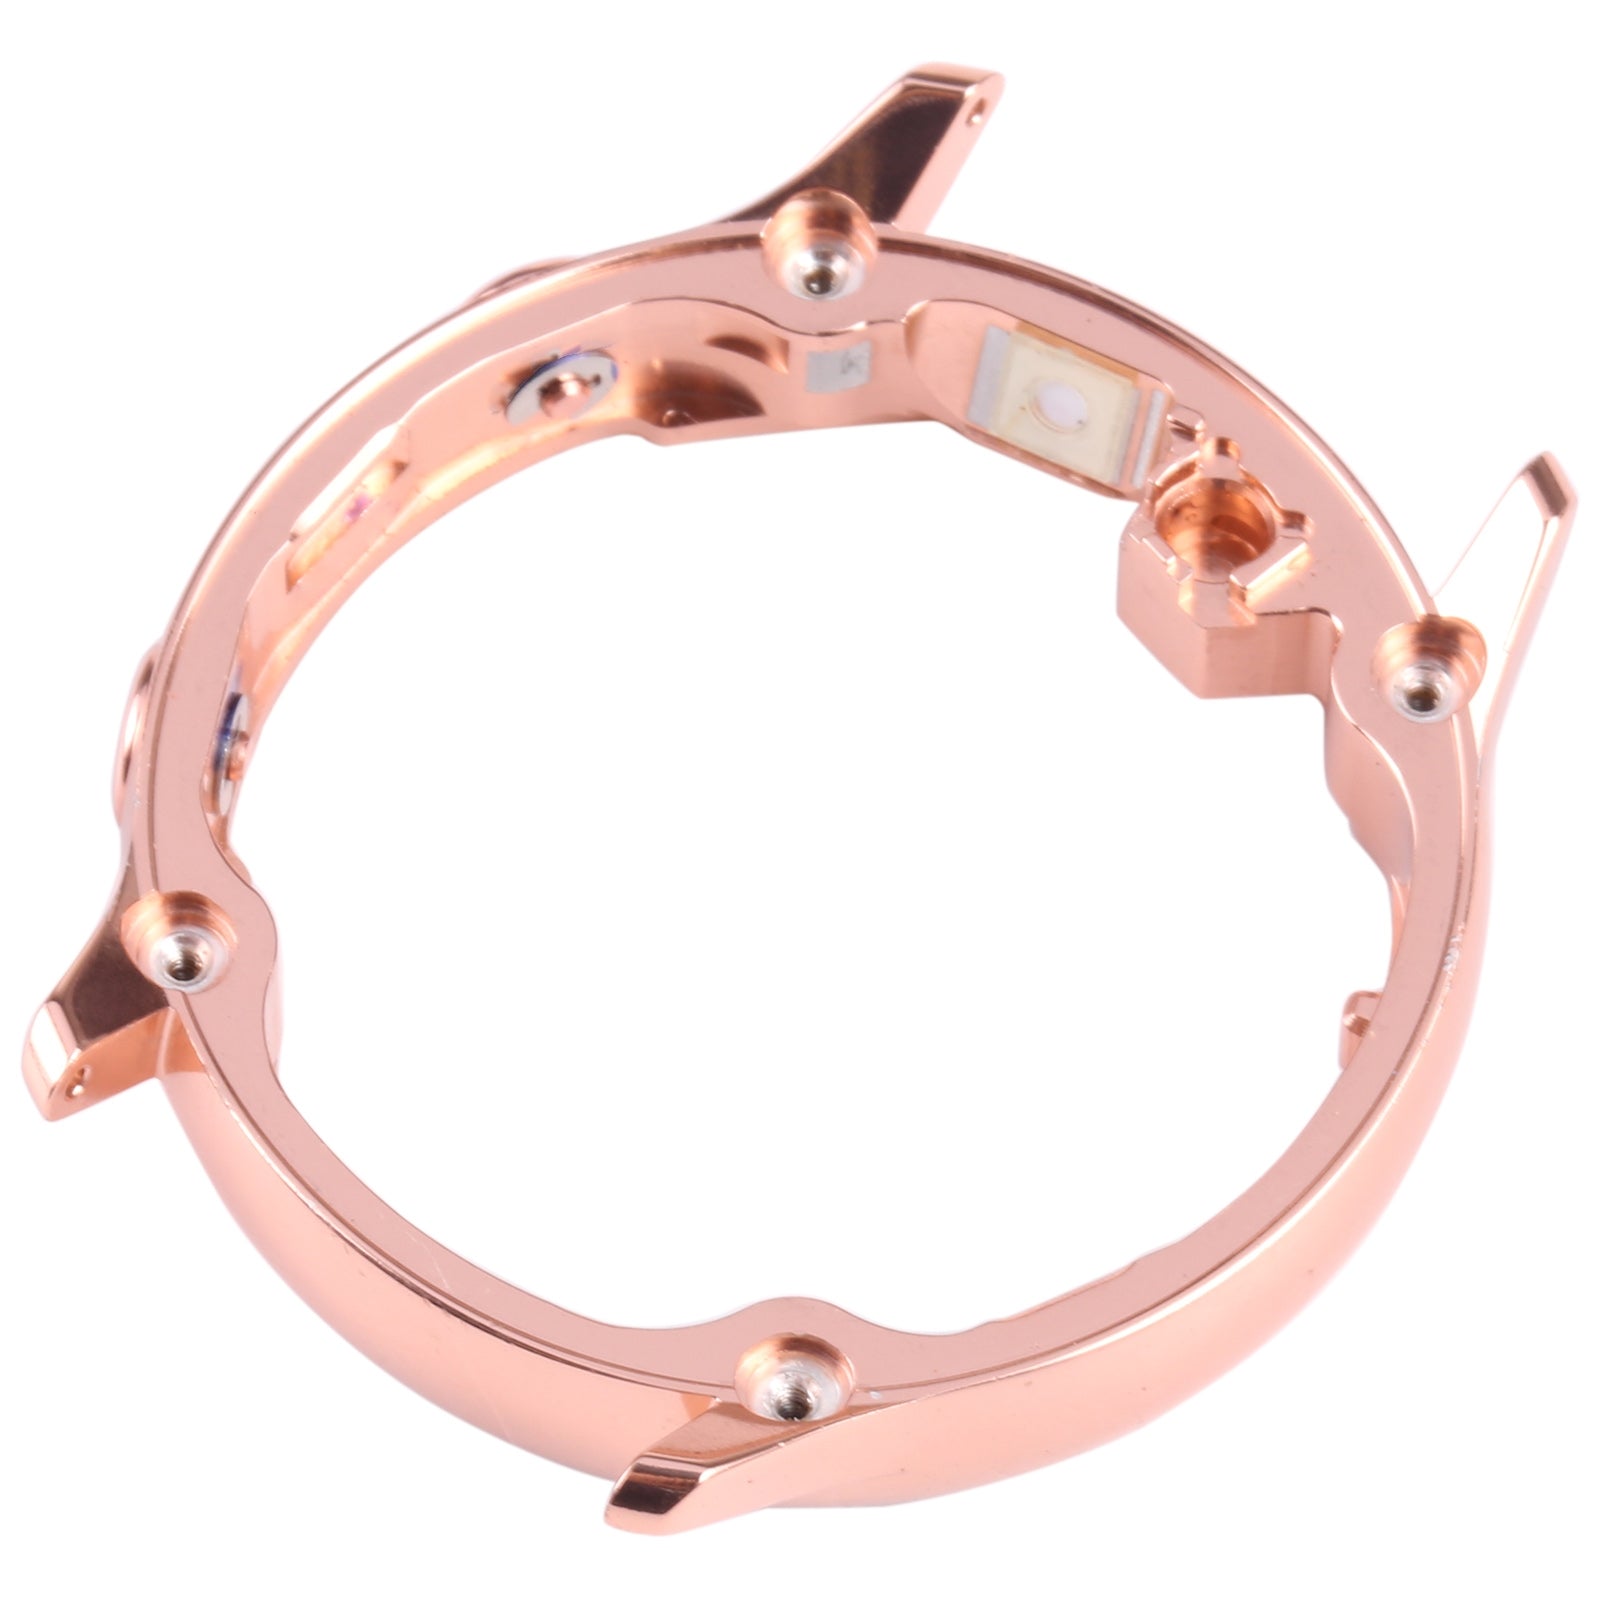 Chassis Front Frame Screen Samsung Galaxy Watch Active R500 Pink